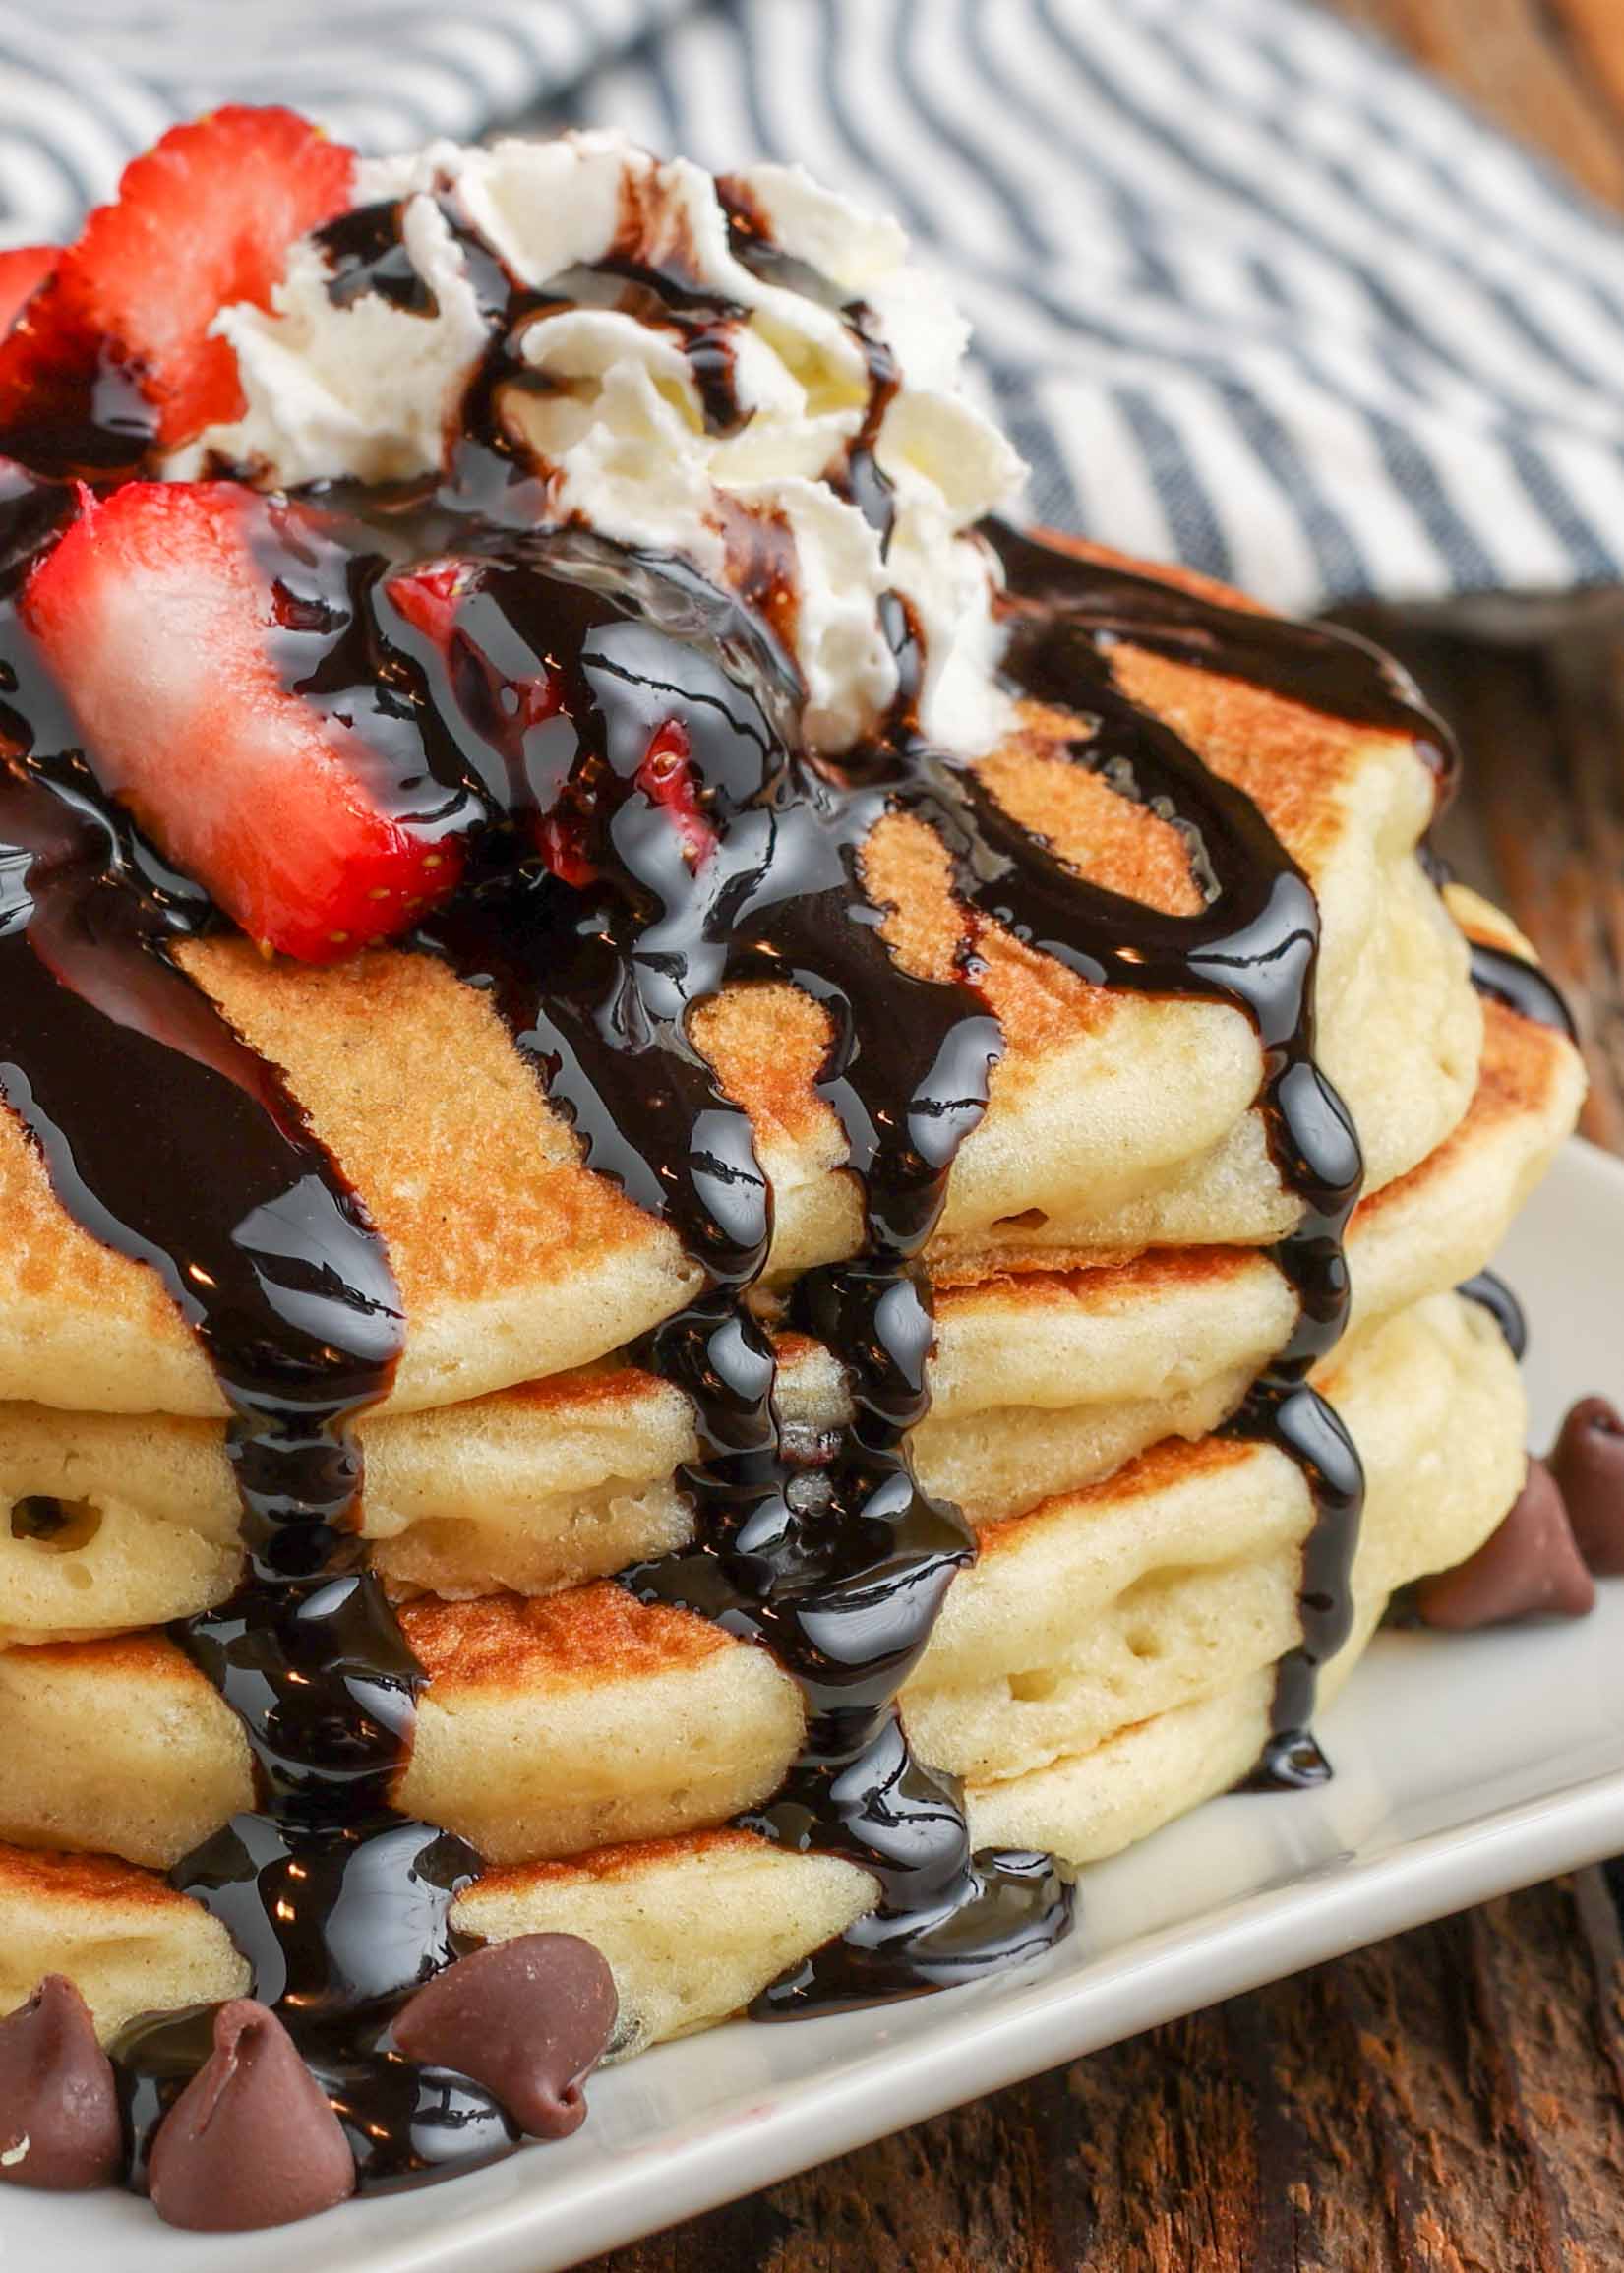 https://chocolatewithgrace.com/wp-content/uploads/2022/11/Chocolate-Chip-Pancakes-CWG-7-1-of-1.jpg